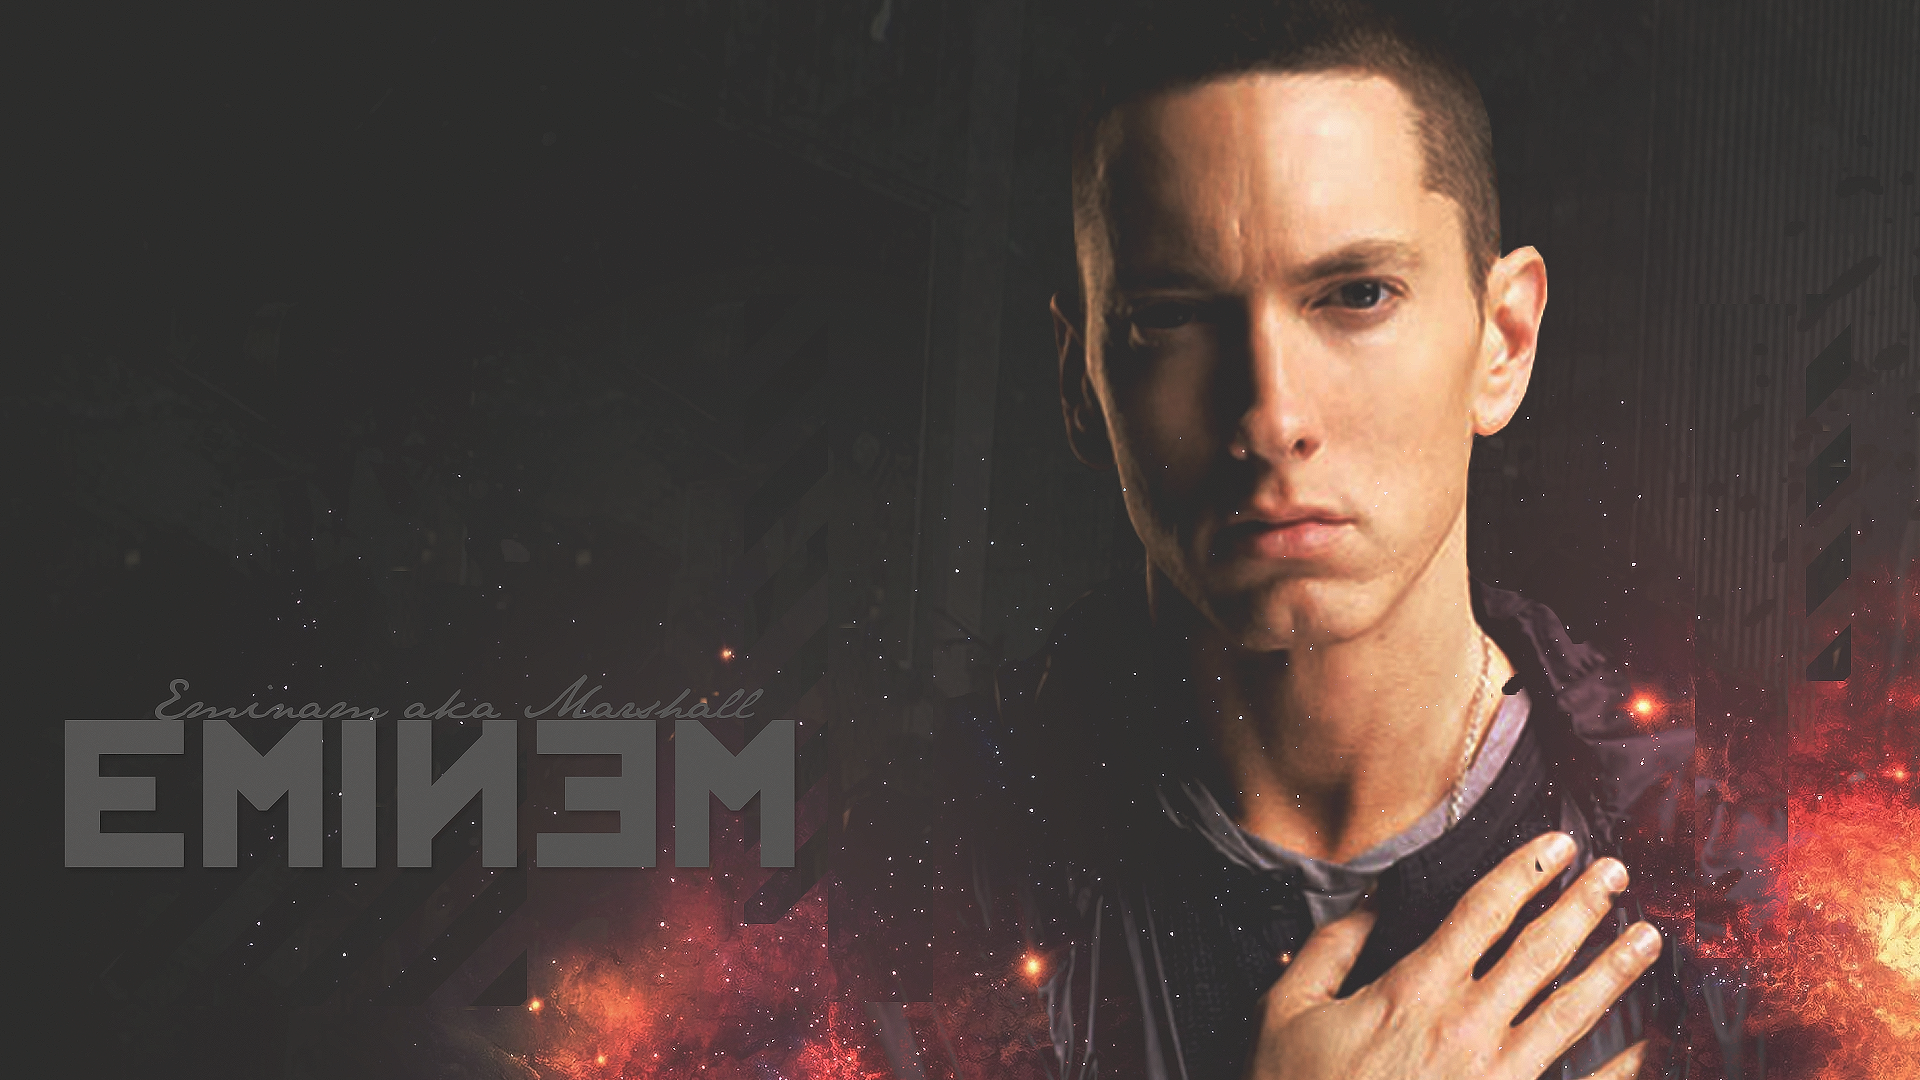 Free download Eminem Wallpapers HD Wallpaper 1024x606 [1024x606] for